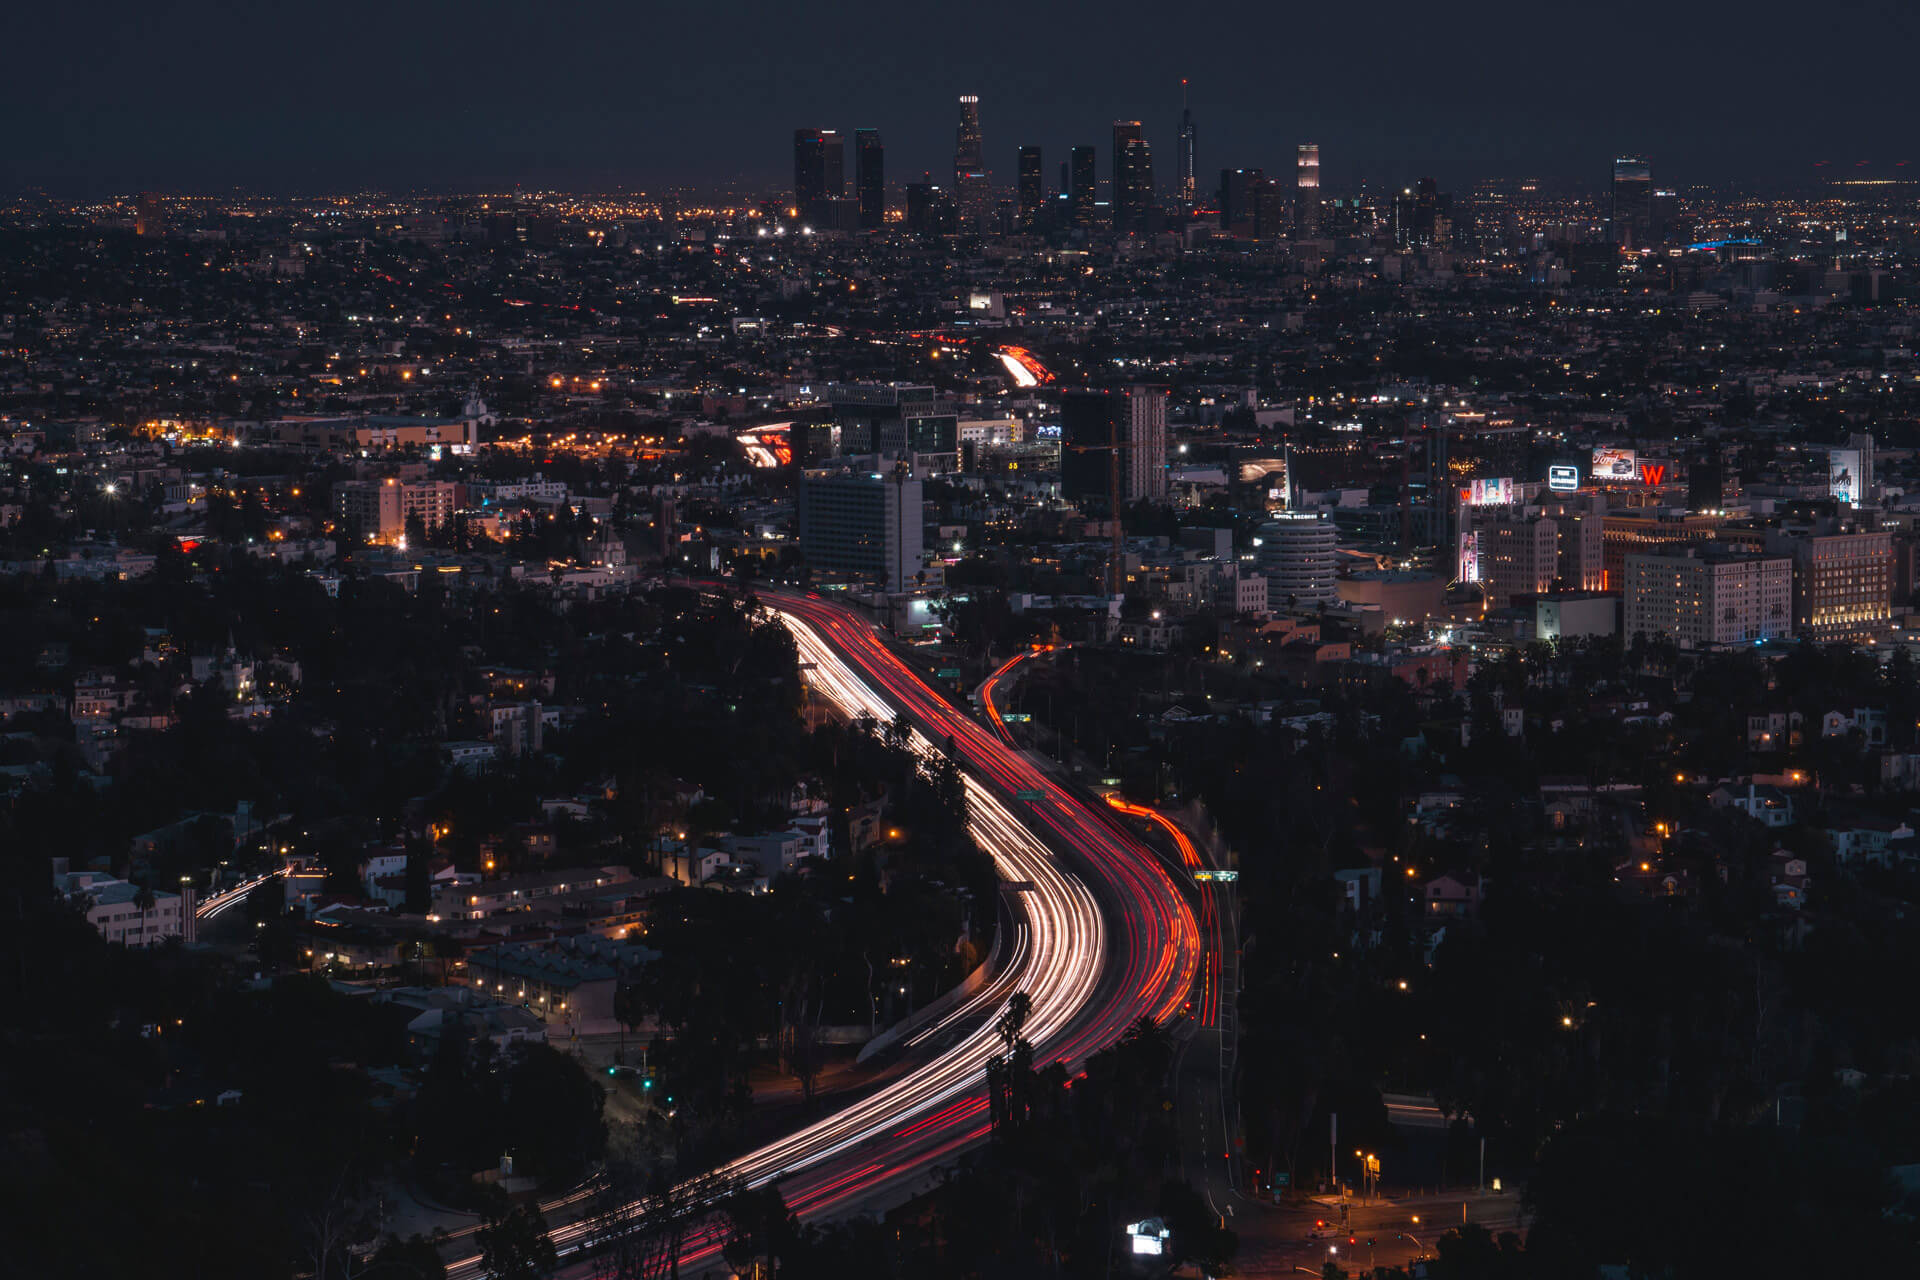 The Los Angeles cityscape at night, illuminated by lights from buildings and cars on the highway.